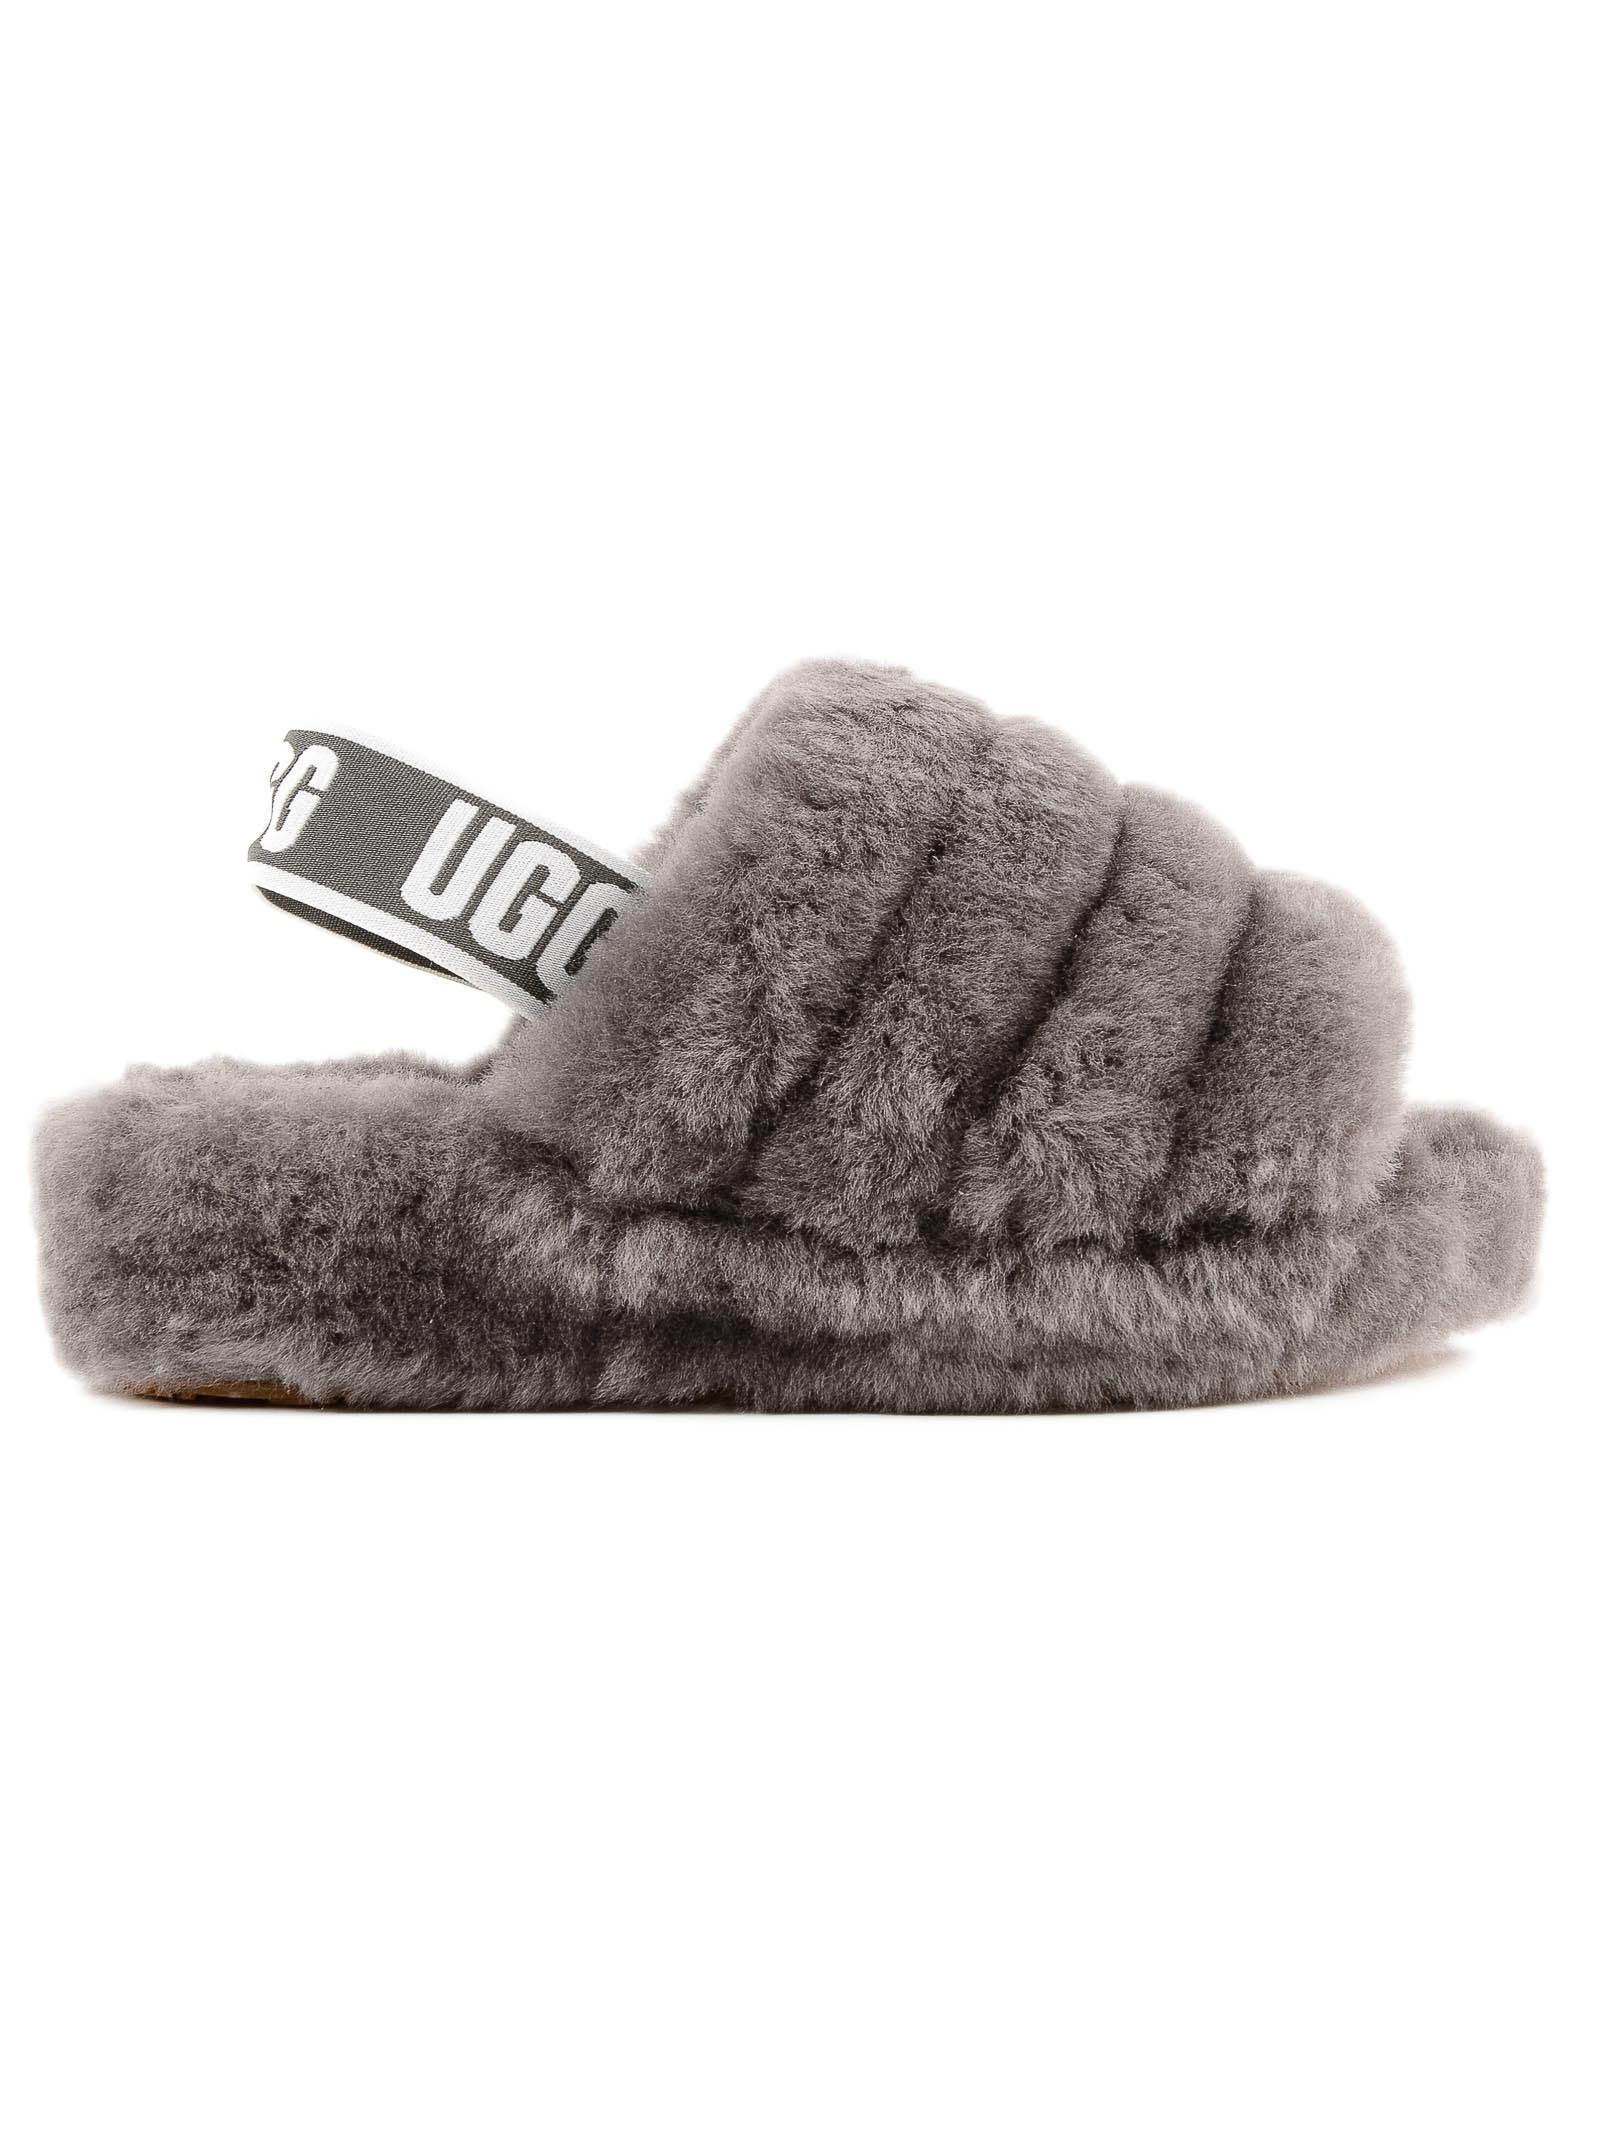 italist | Best price in the market for UGG Ugg Fluff Yeah Sliders ...